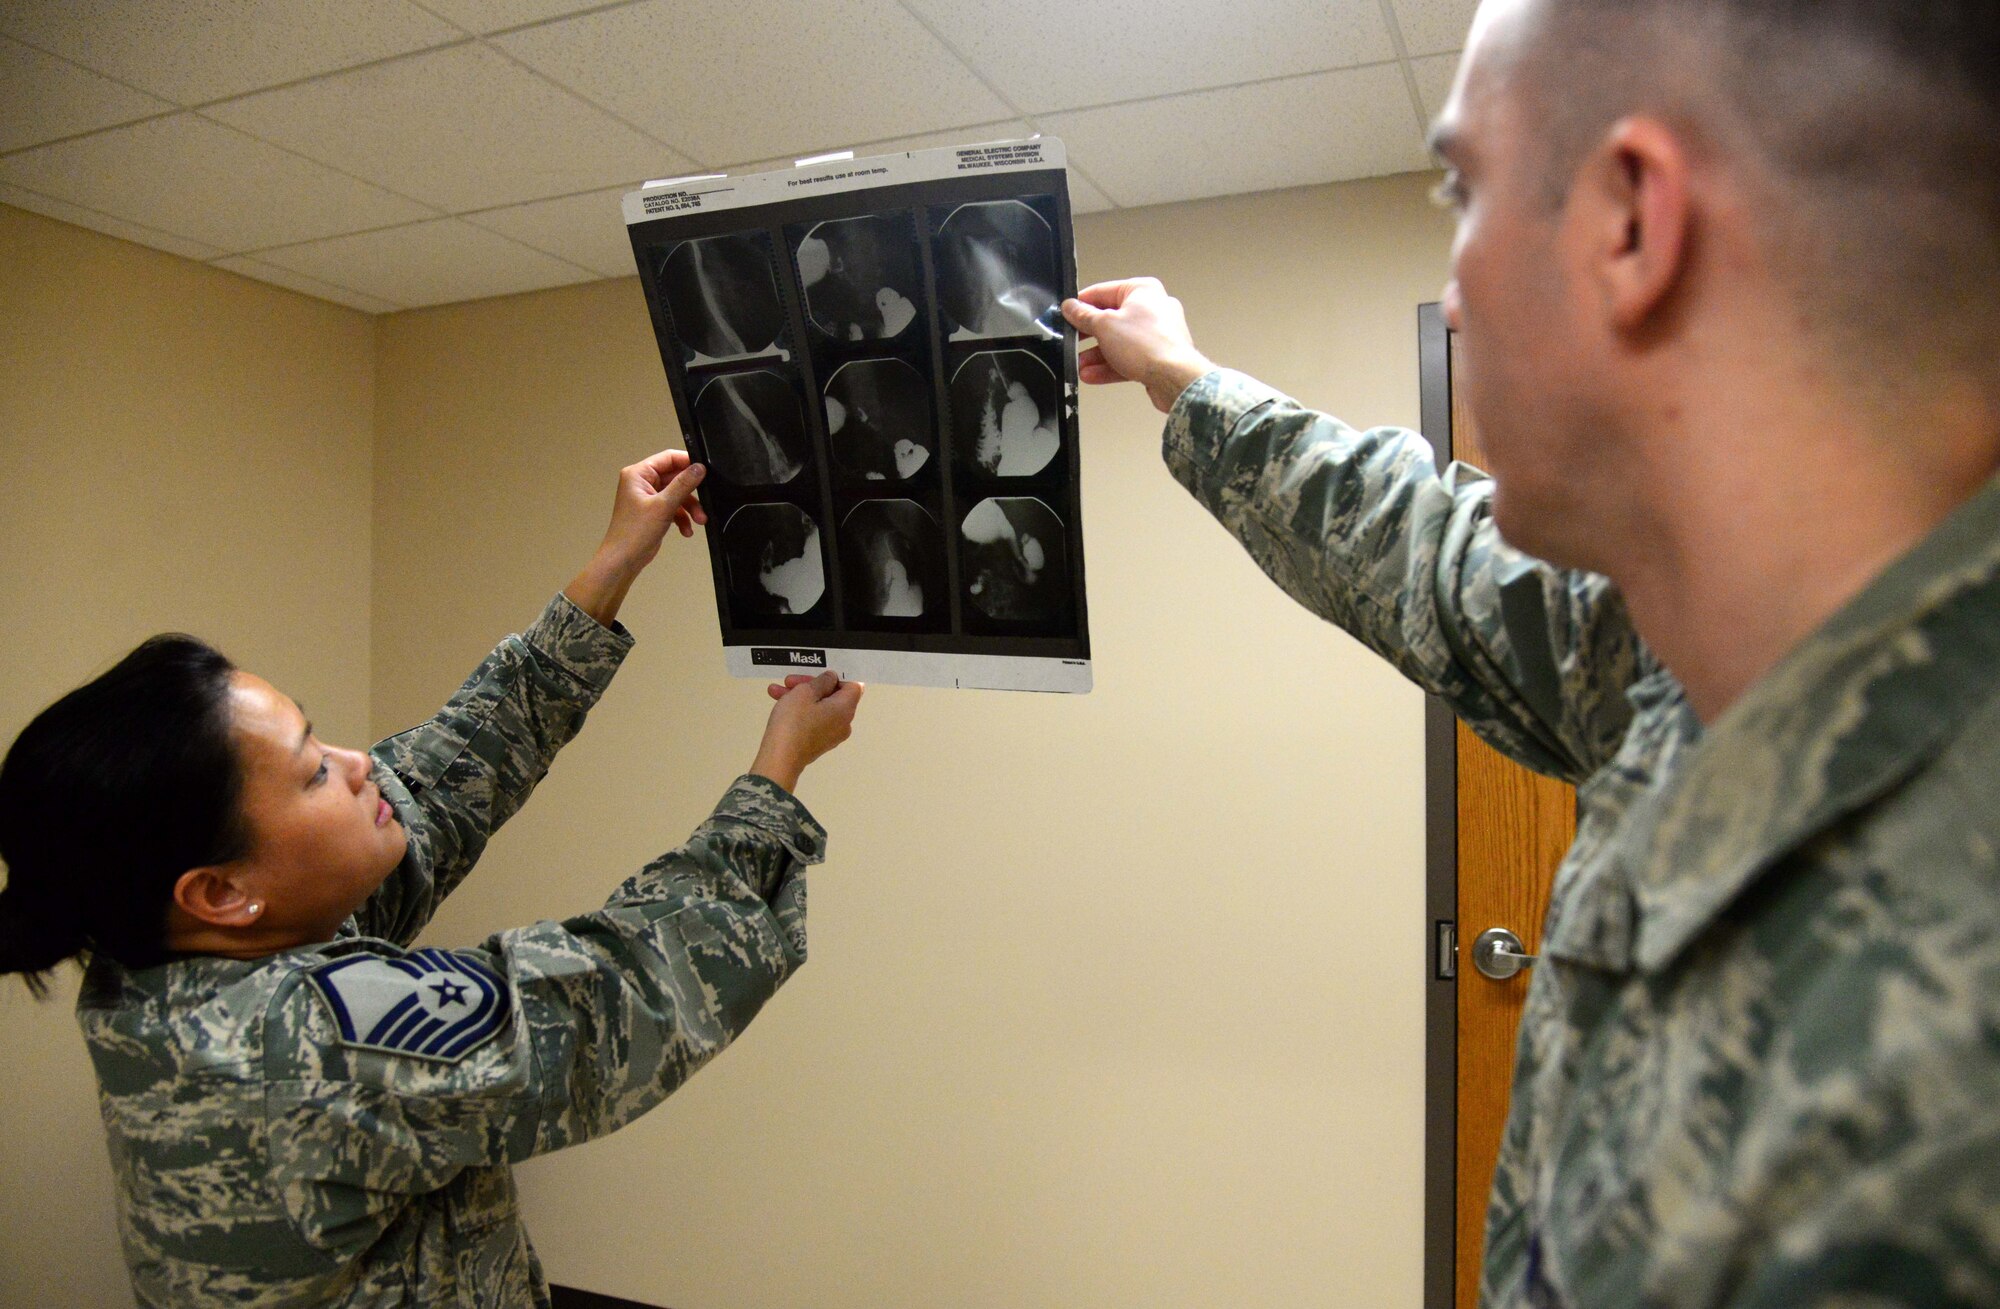 Master Sgt. Mia Newmeyer, 28th Medical Support Squadron diagnostic imaging noncommissioned officer in charge, shows Staff Sgt. Ryan Gulland, a 28th Medical Support Squadron diagnostic imaging technician, an old X-ray during a training session at the 28th Medical Group at Ellsworth Air Force Base, S.D., May 11, 2018. Diagnostic images processed and stored electronically to allow for accurate and expedient review. (U.S. Air Force photo by Senior Airman Denise Jenson)